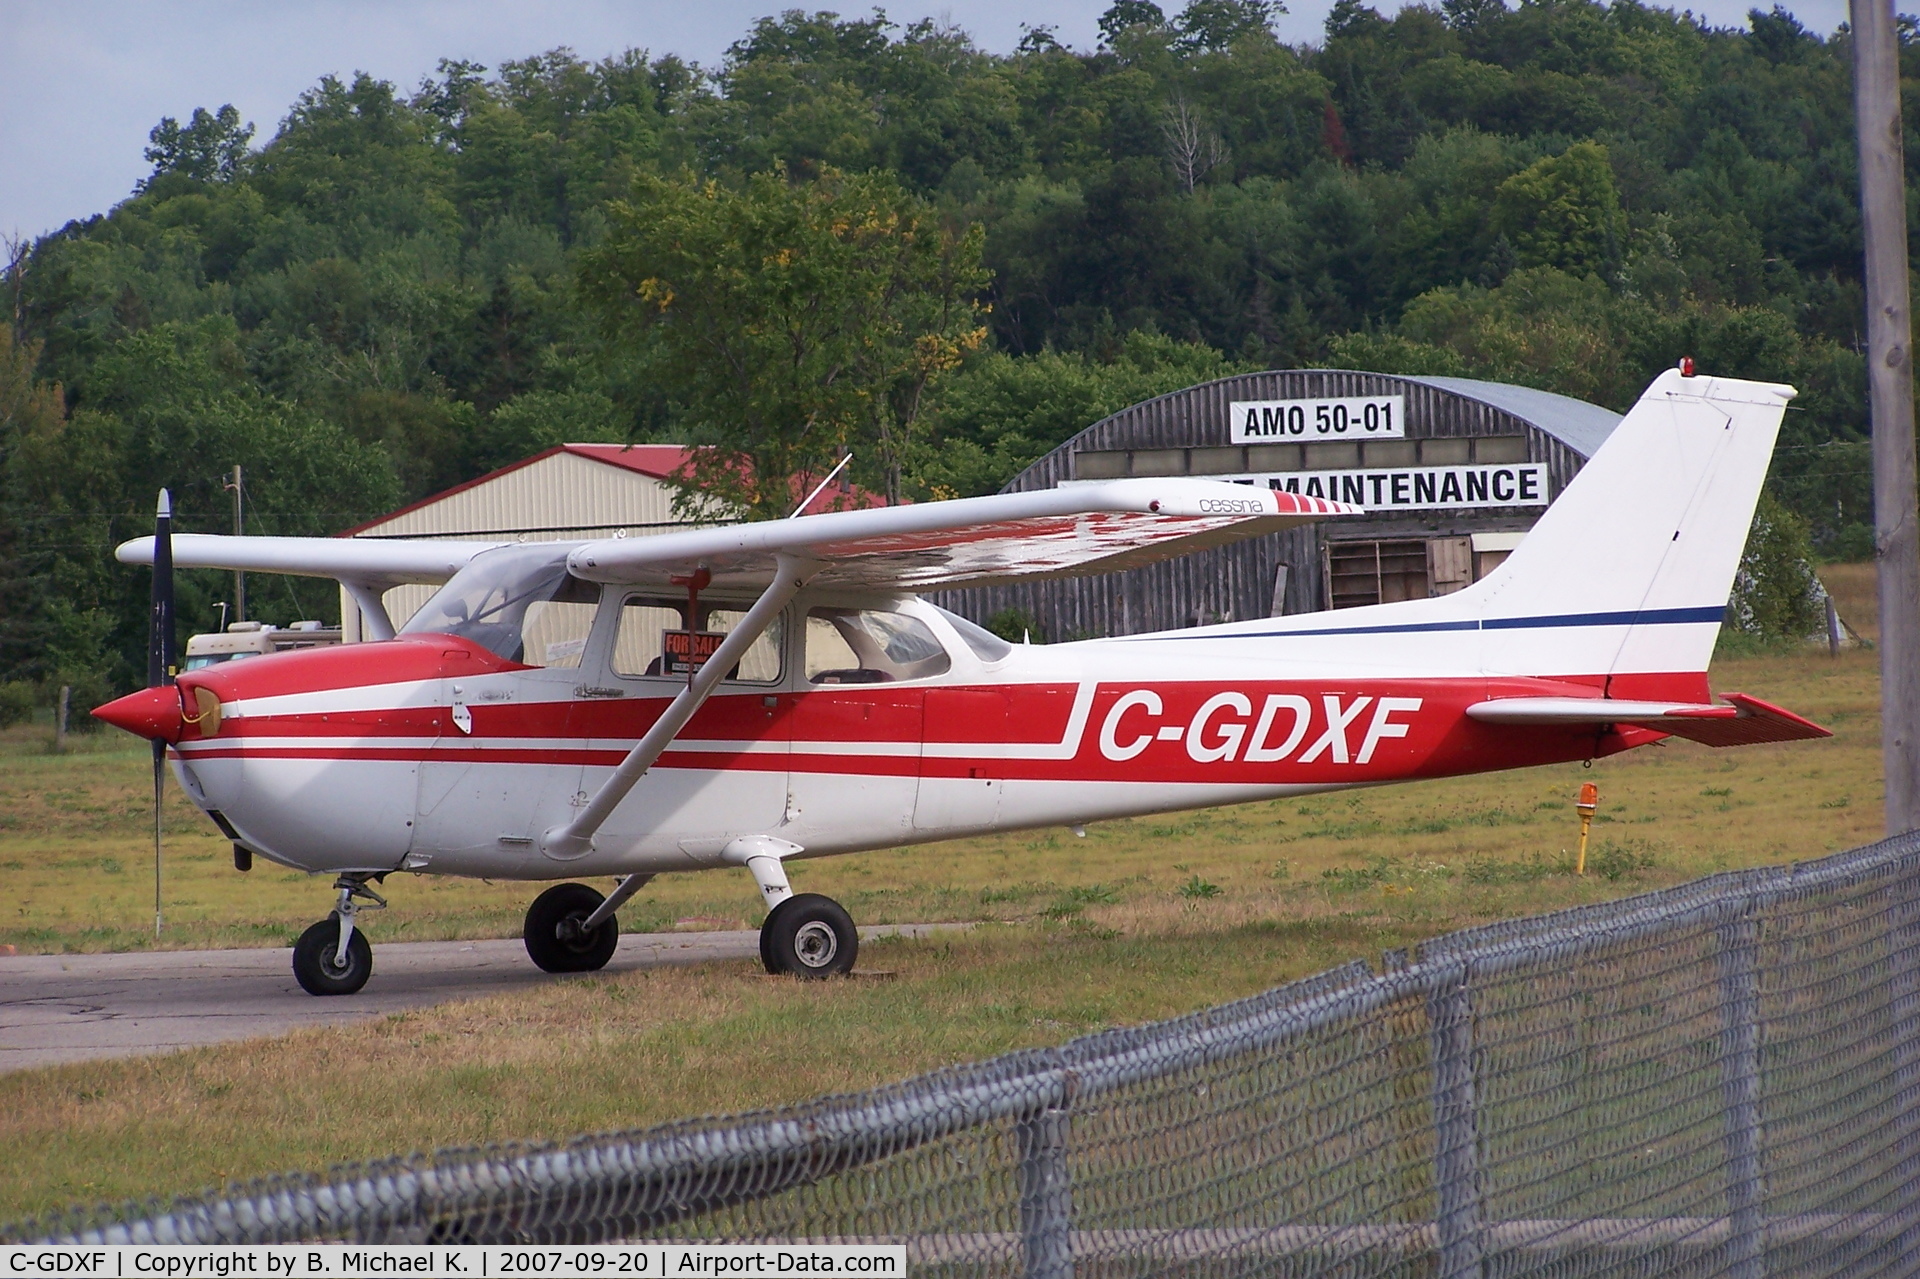 C-GDXF, 1976 Cessna 172M C/N 17266927, Plane was for sale in August